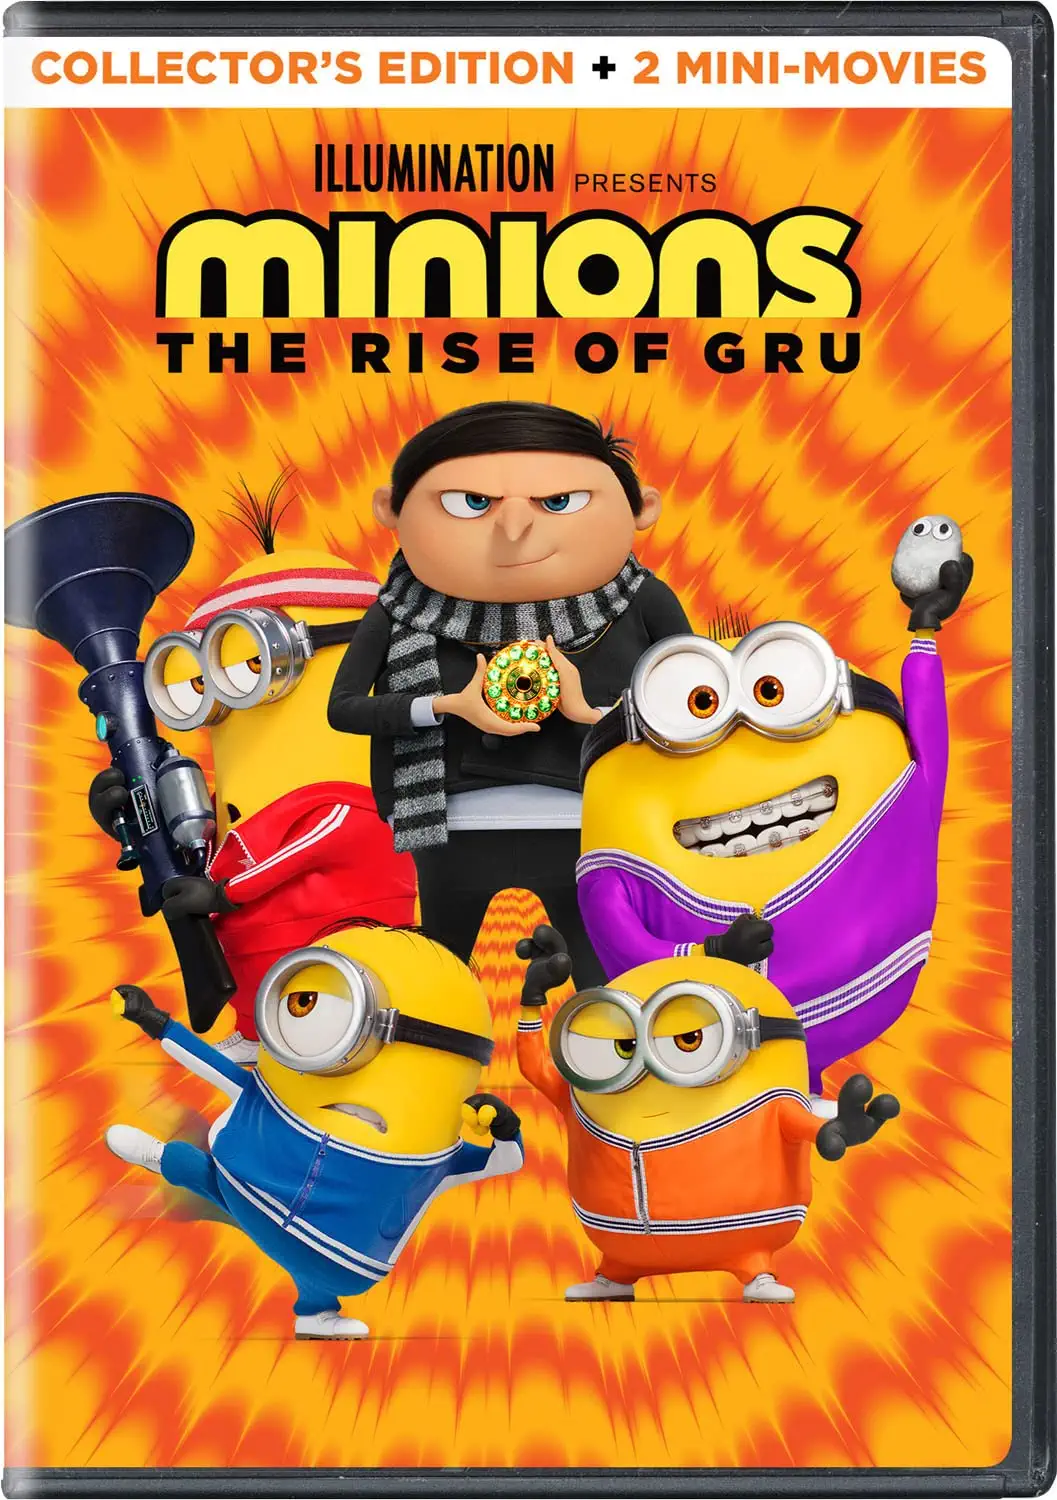 Image for "minions: the rise of gru"